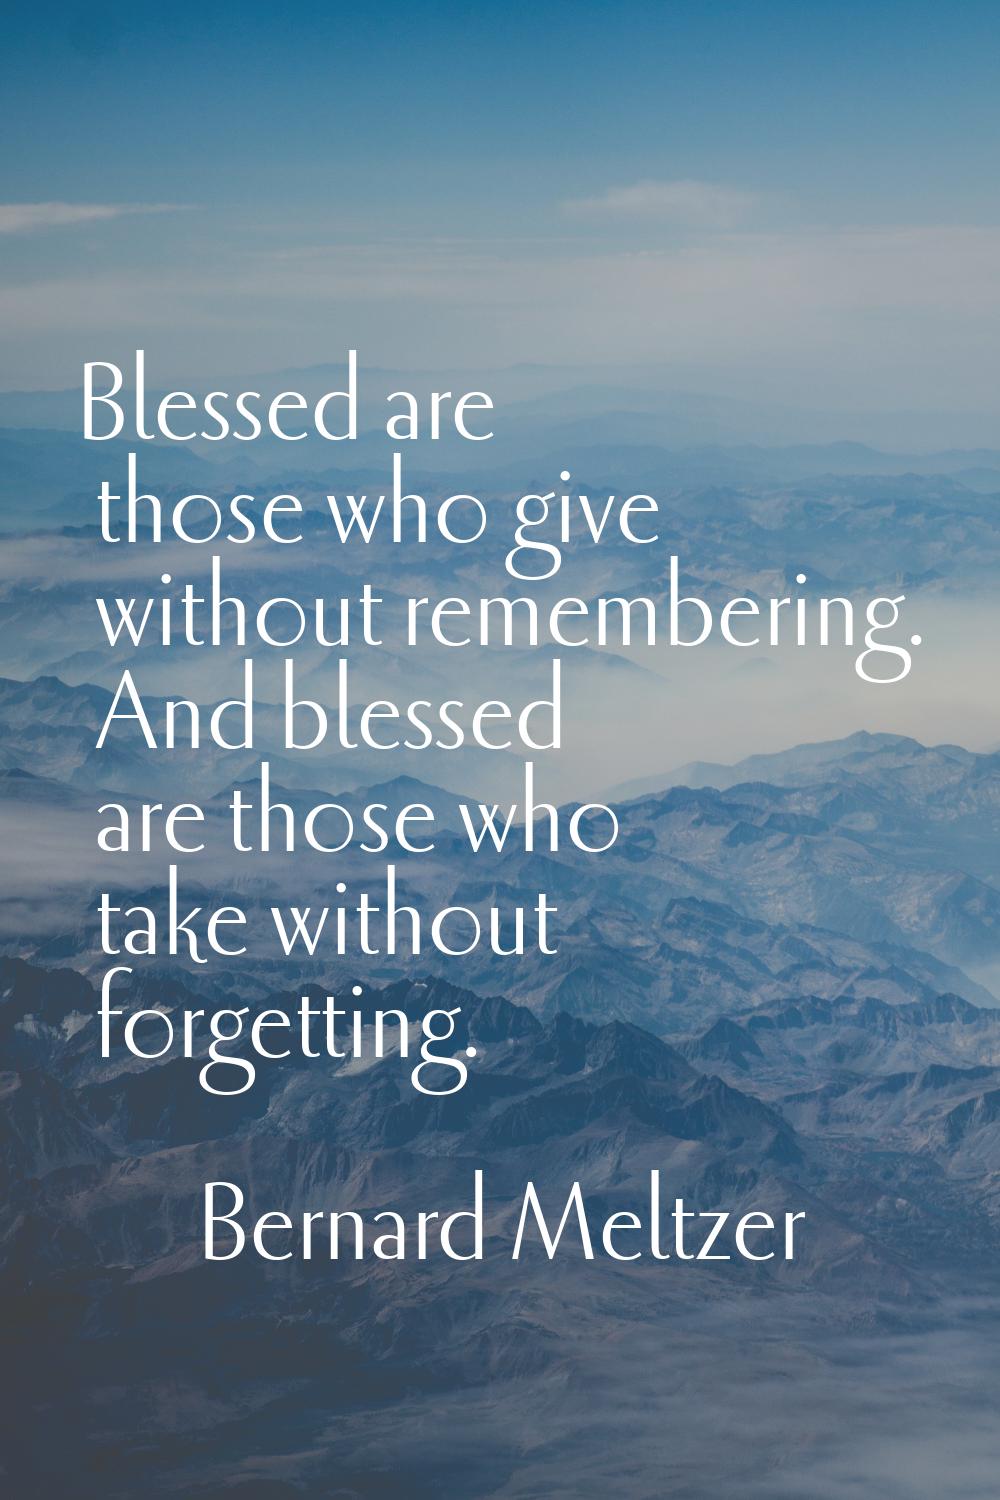 Blessed are those who give without remembering. And blessed are those who take without forgetting.